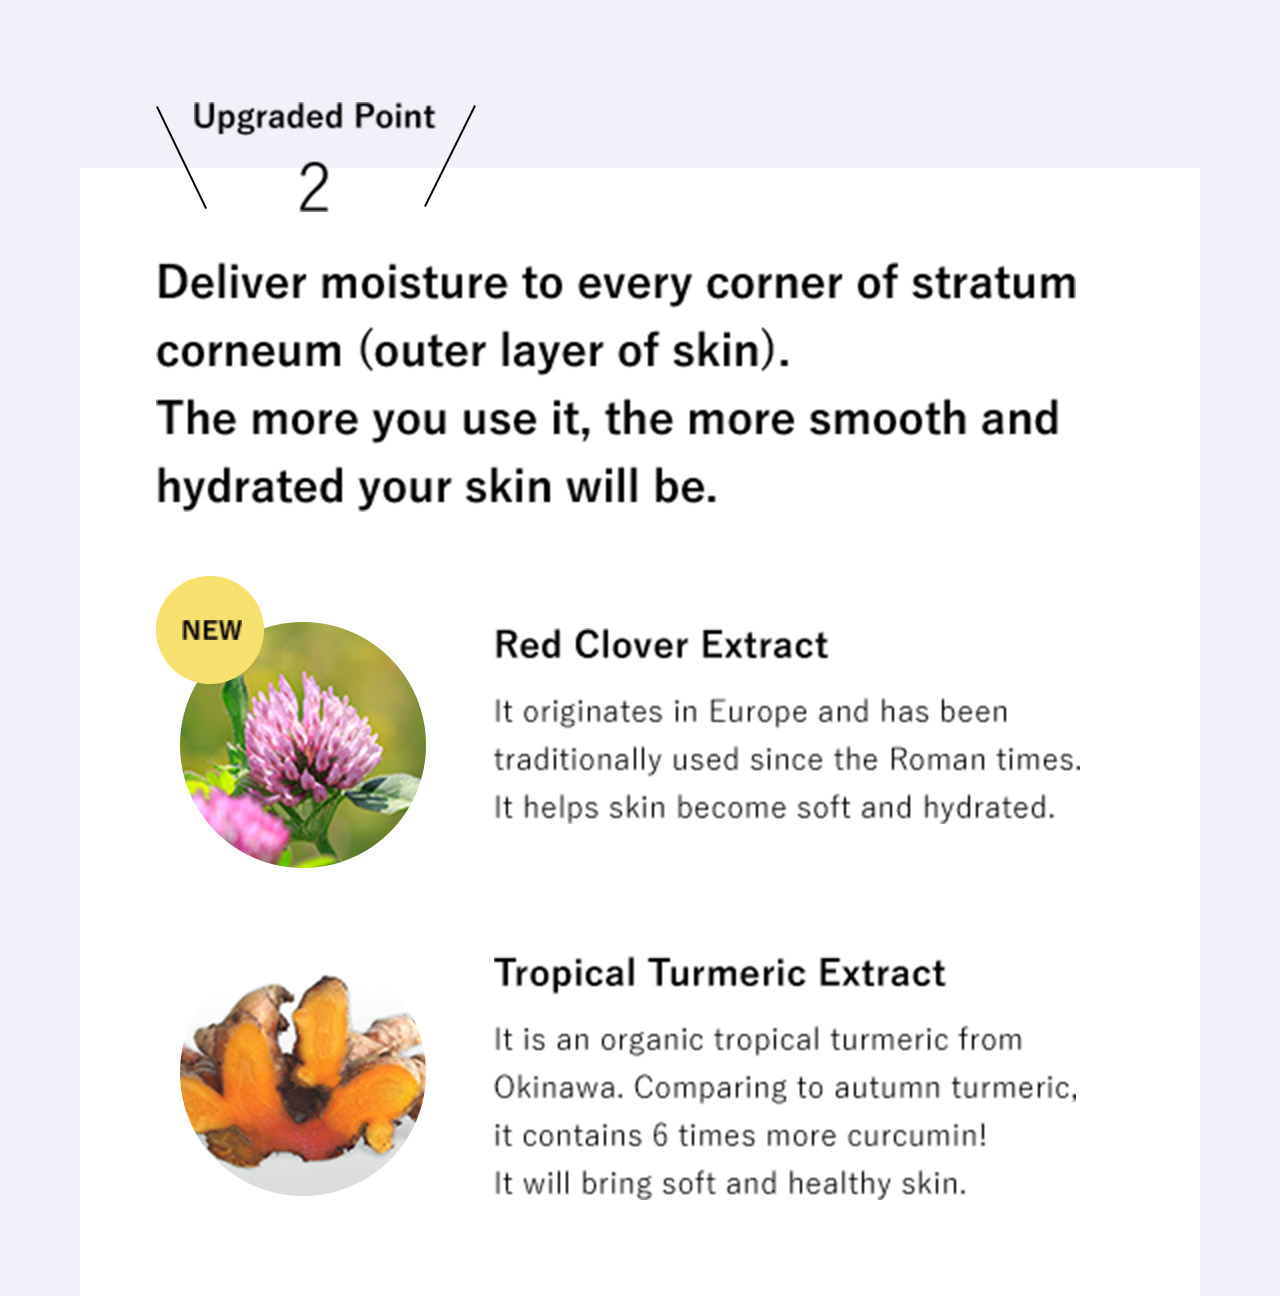 Upgraded Point 2: Deliver moisture to every corner of stratum corneum (outer layer of skin). The more you use it, the more smooth and hydrated your skin will be.